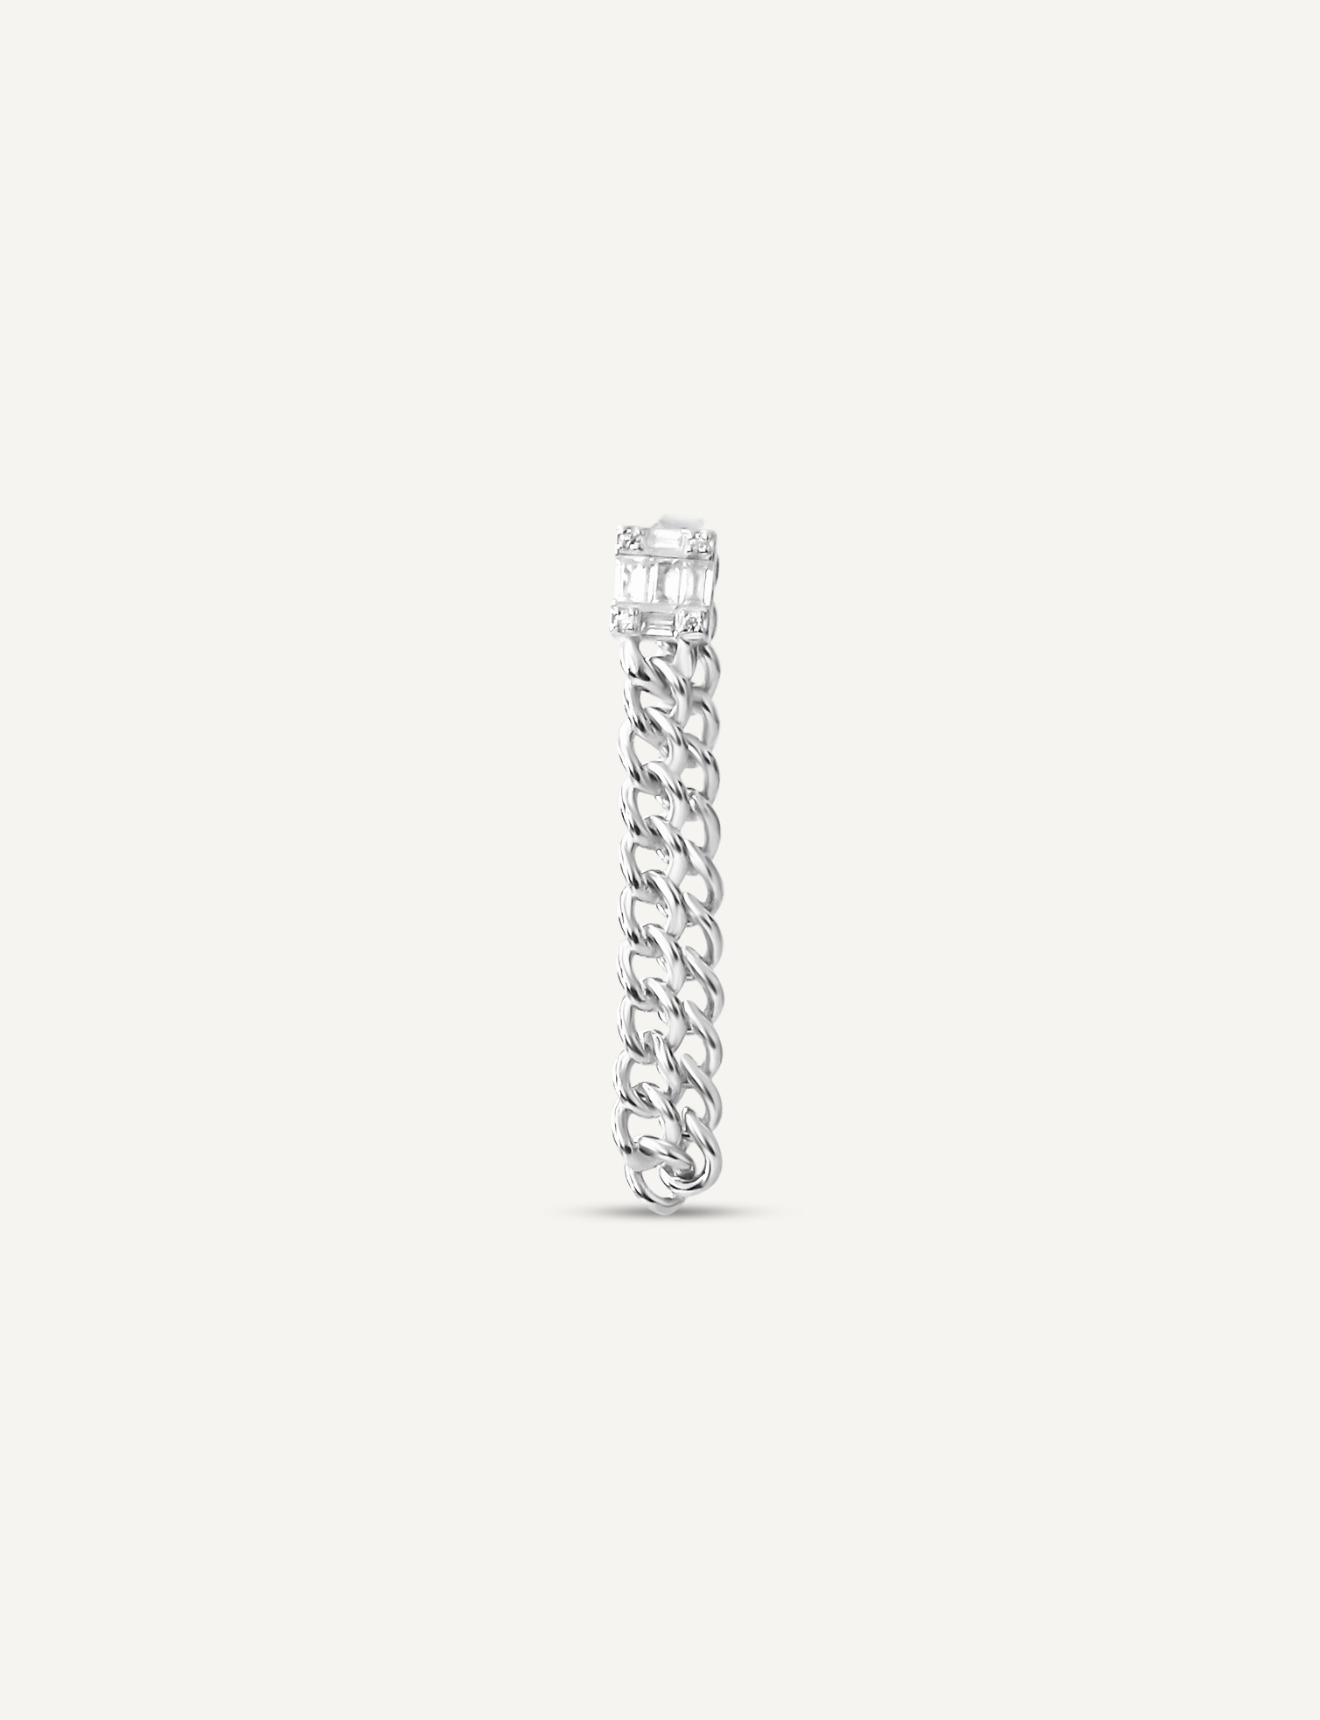 925 Sterling Silver chain earring connected to a square cut clear Cubic Zirconia stud.